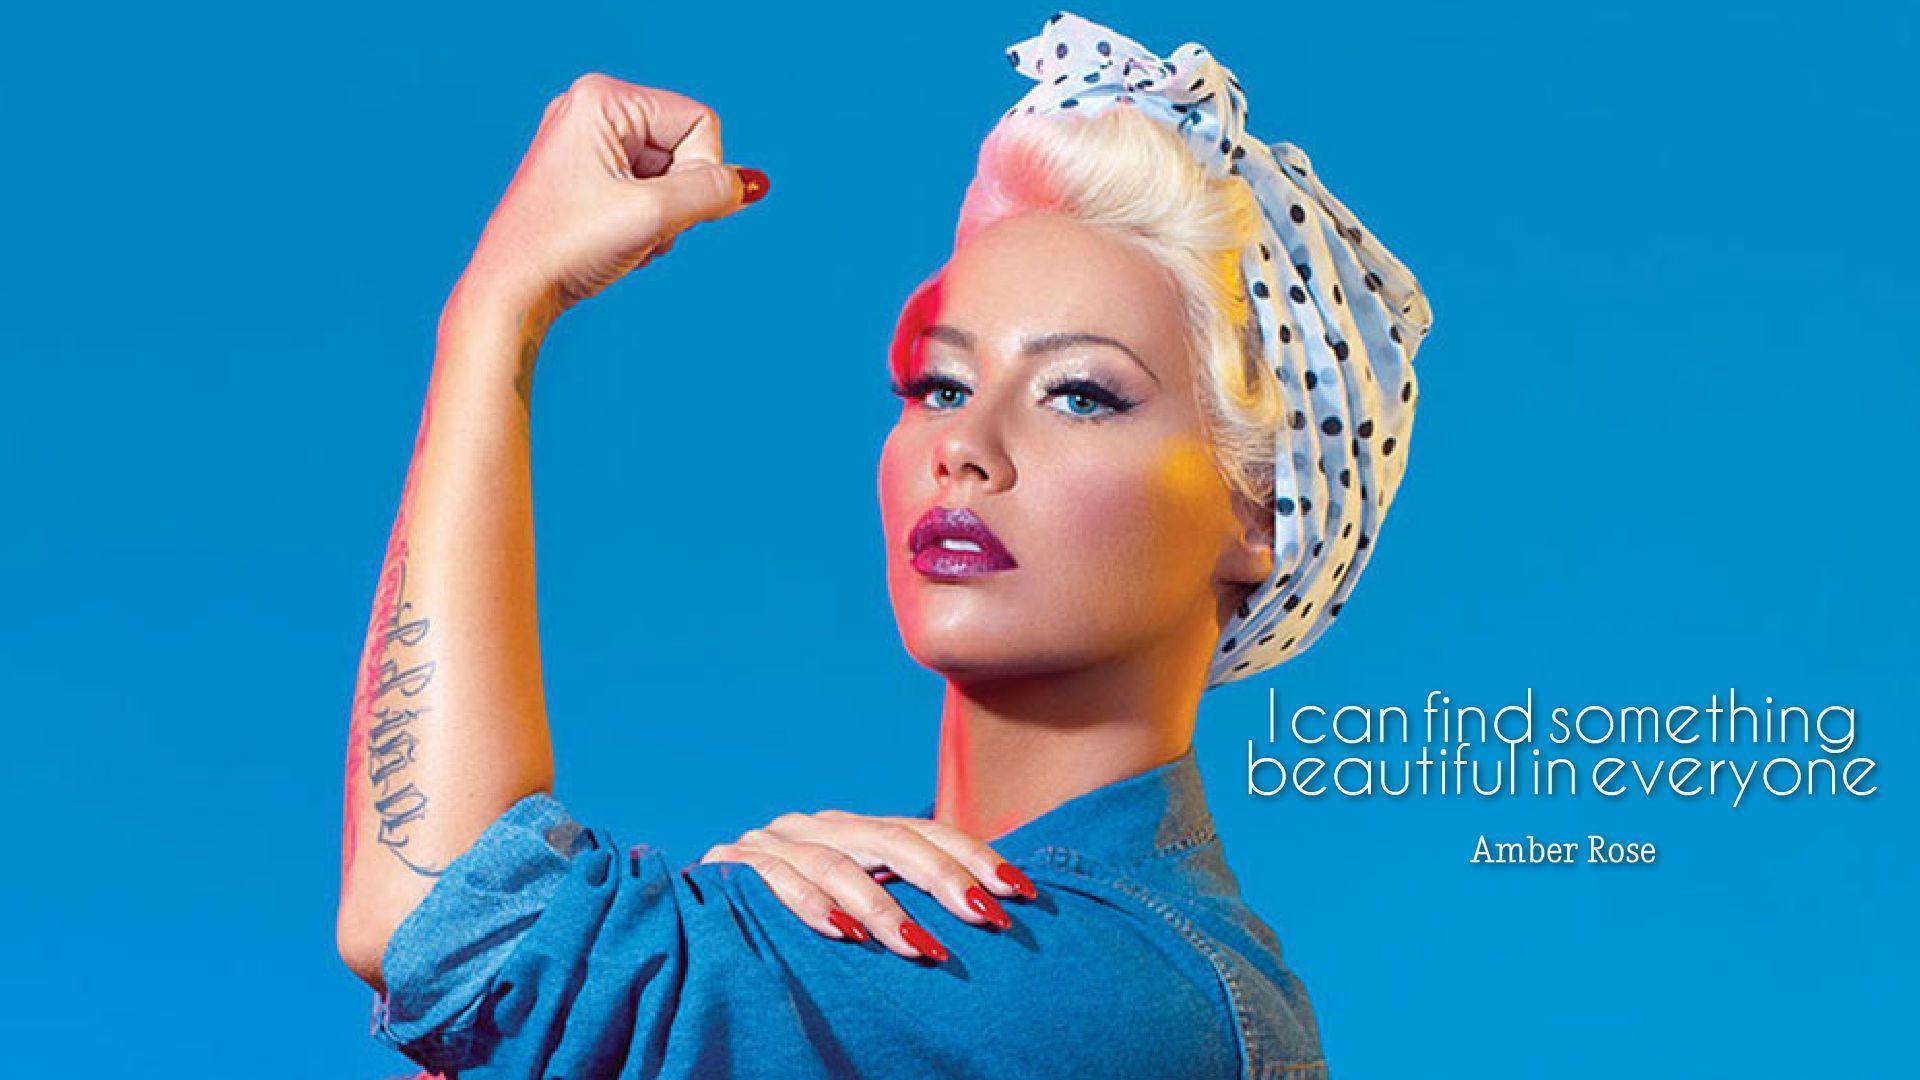 Amber Rose Quotes Wallpaper HD 13434